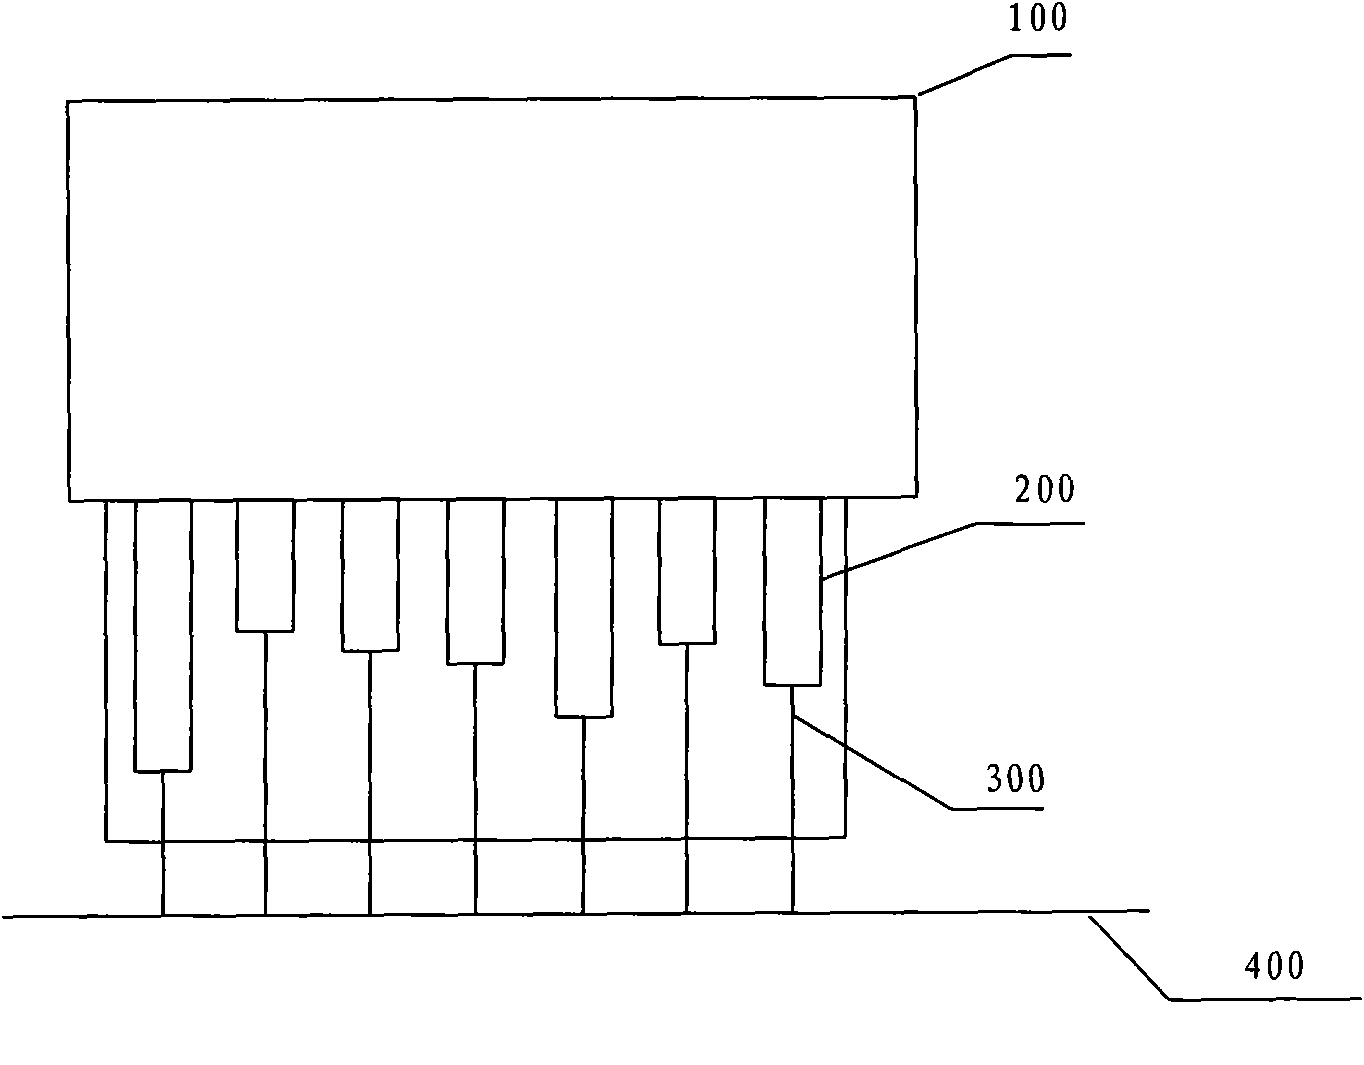 Method for manufacturing printed circuit board edge connector